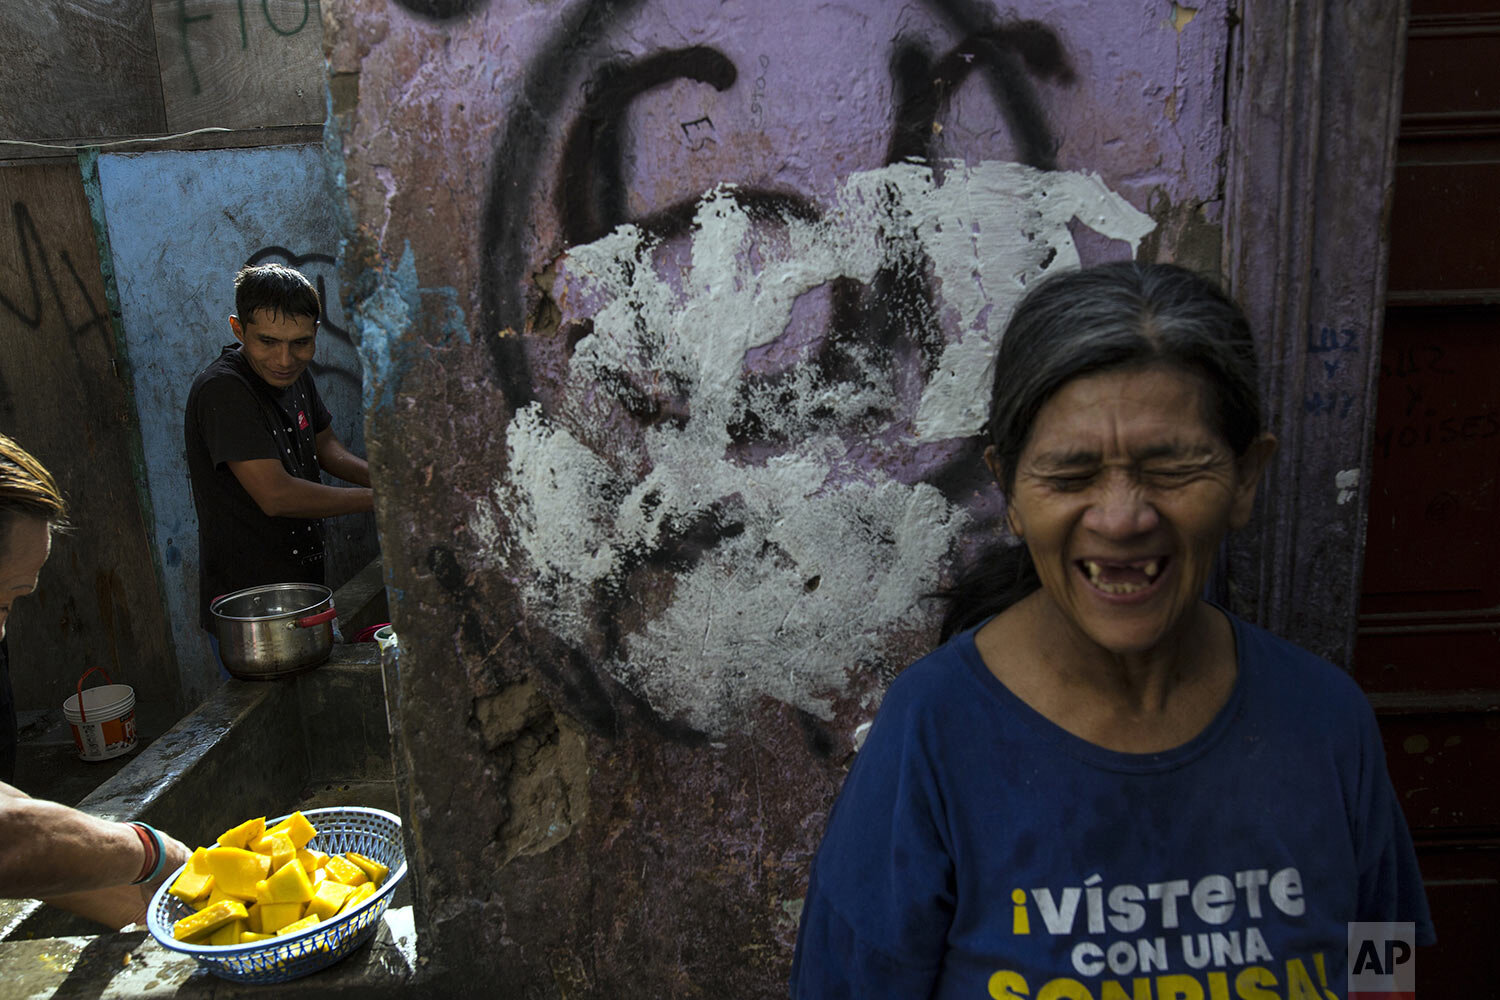  In this March 19, 2020 photo, Nelida Rojas, wearing a T-shirt emblazoned with a message that reads in Spanish: "Dress yourself with a smile", laughs as she jokes with fellow residents as she waits her turn to use the communal laundry area, inside a 